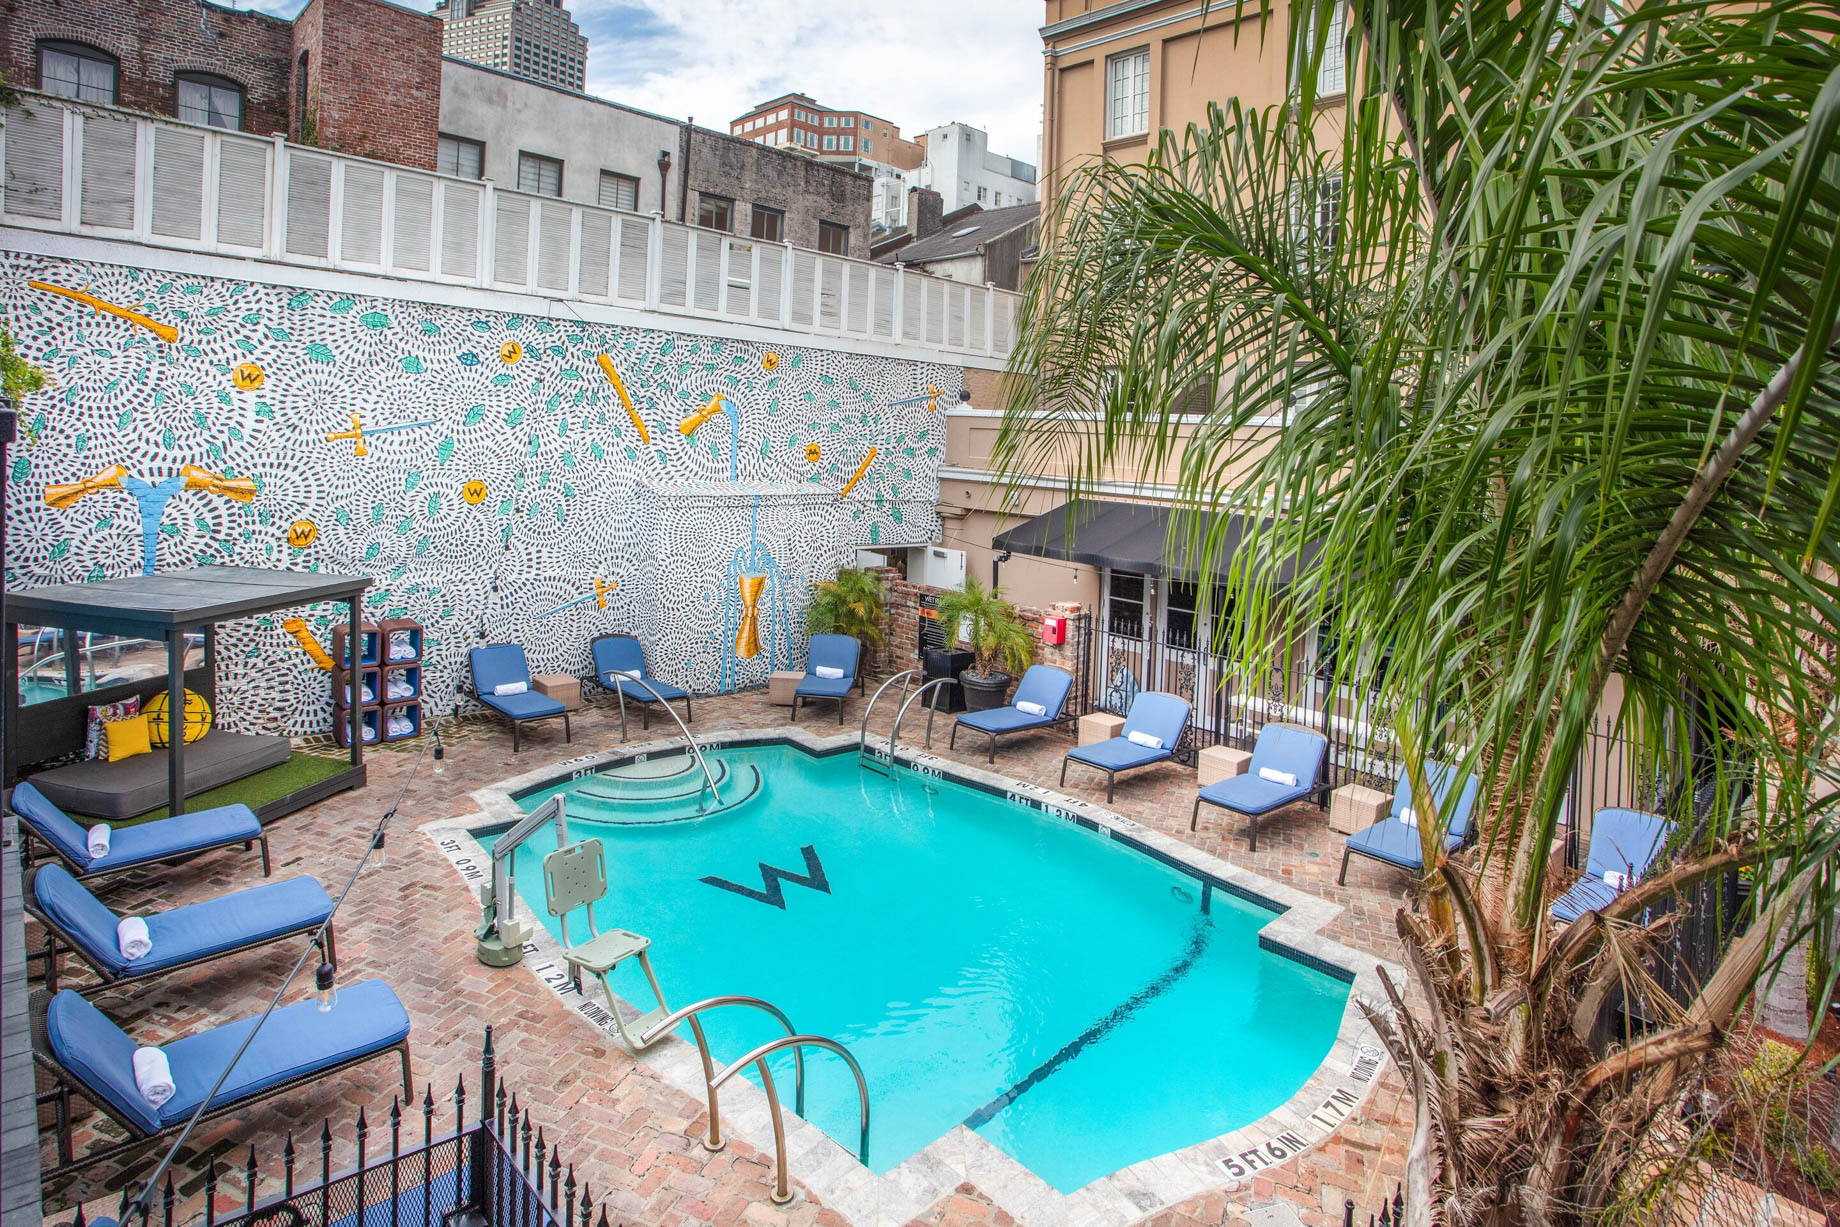 W New Orleans French Quarter Hotel – New Orleans, LA, USA – WET Deck Courtyard Pool View